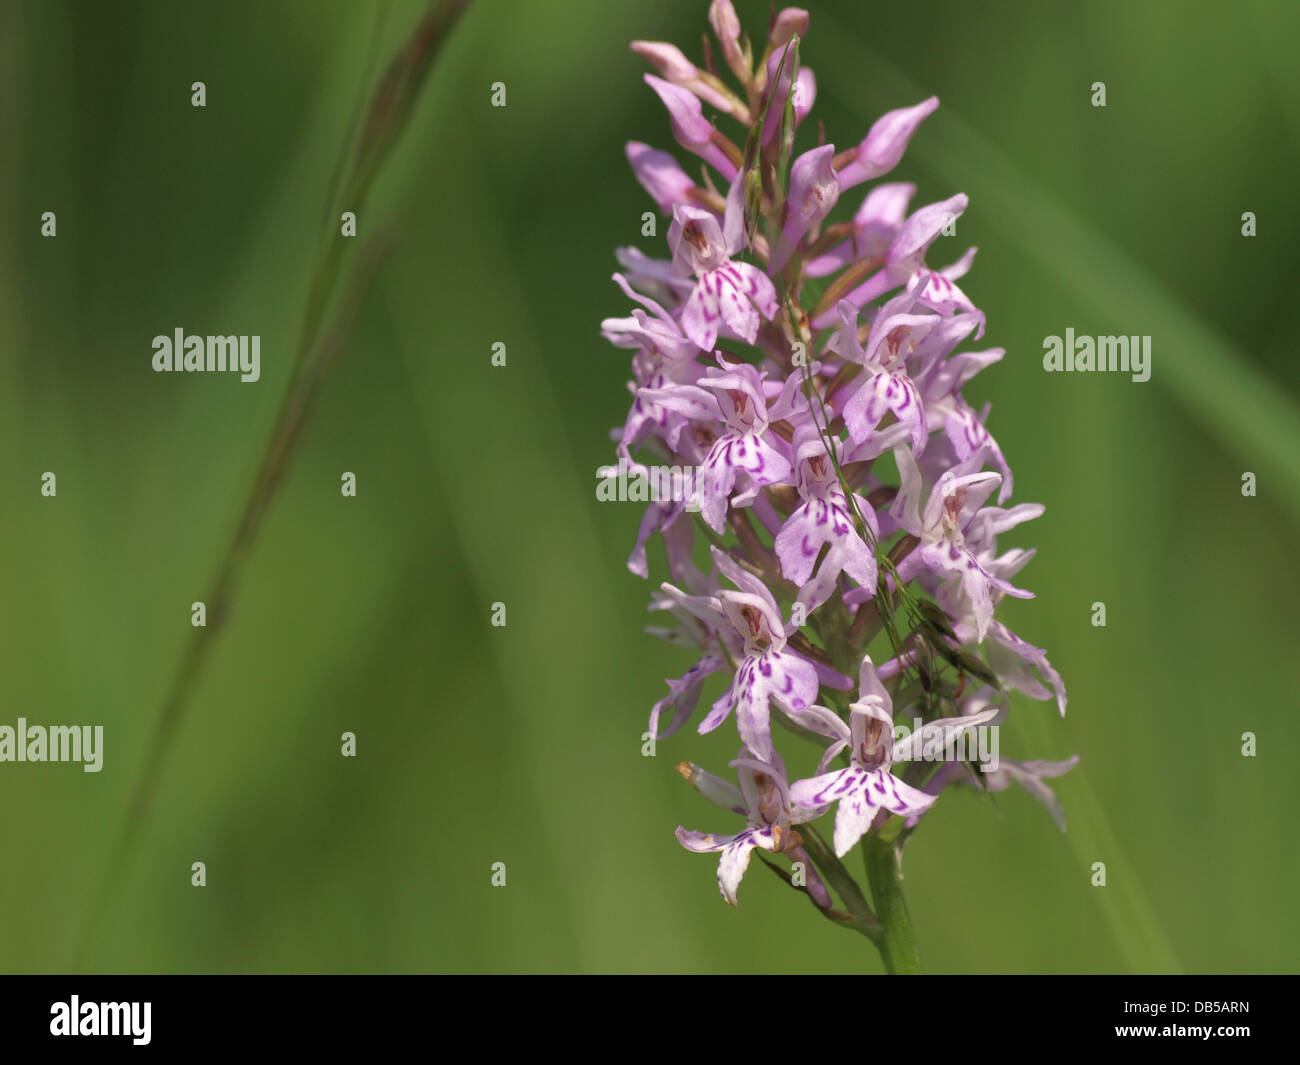 Heath spotted orchid, moorland spotted orchid / Dactylorhiza maculata / Geflecktes Knabenkraut Stock Photo